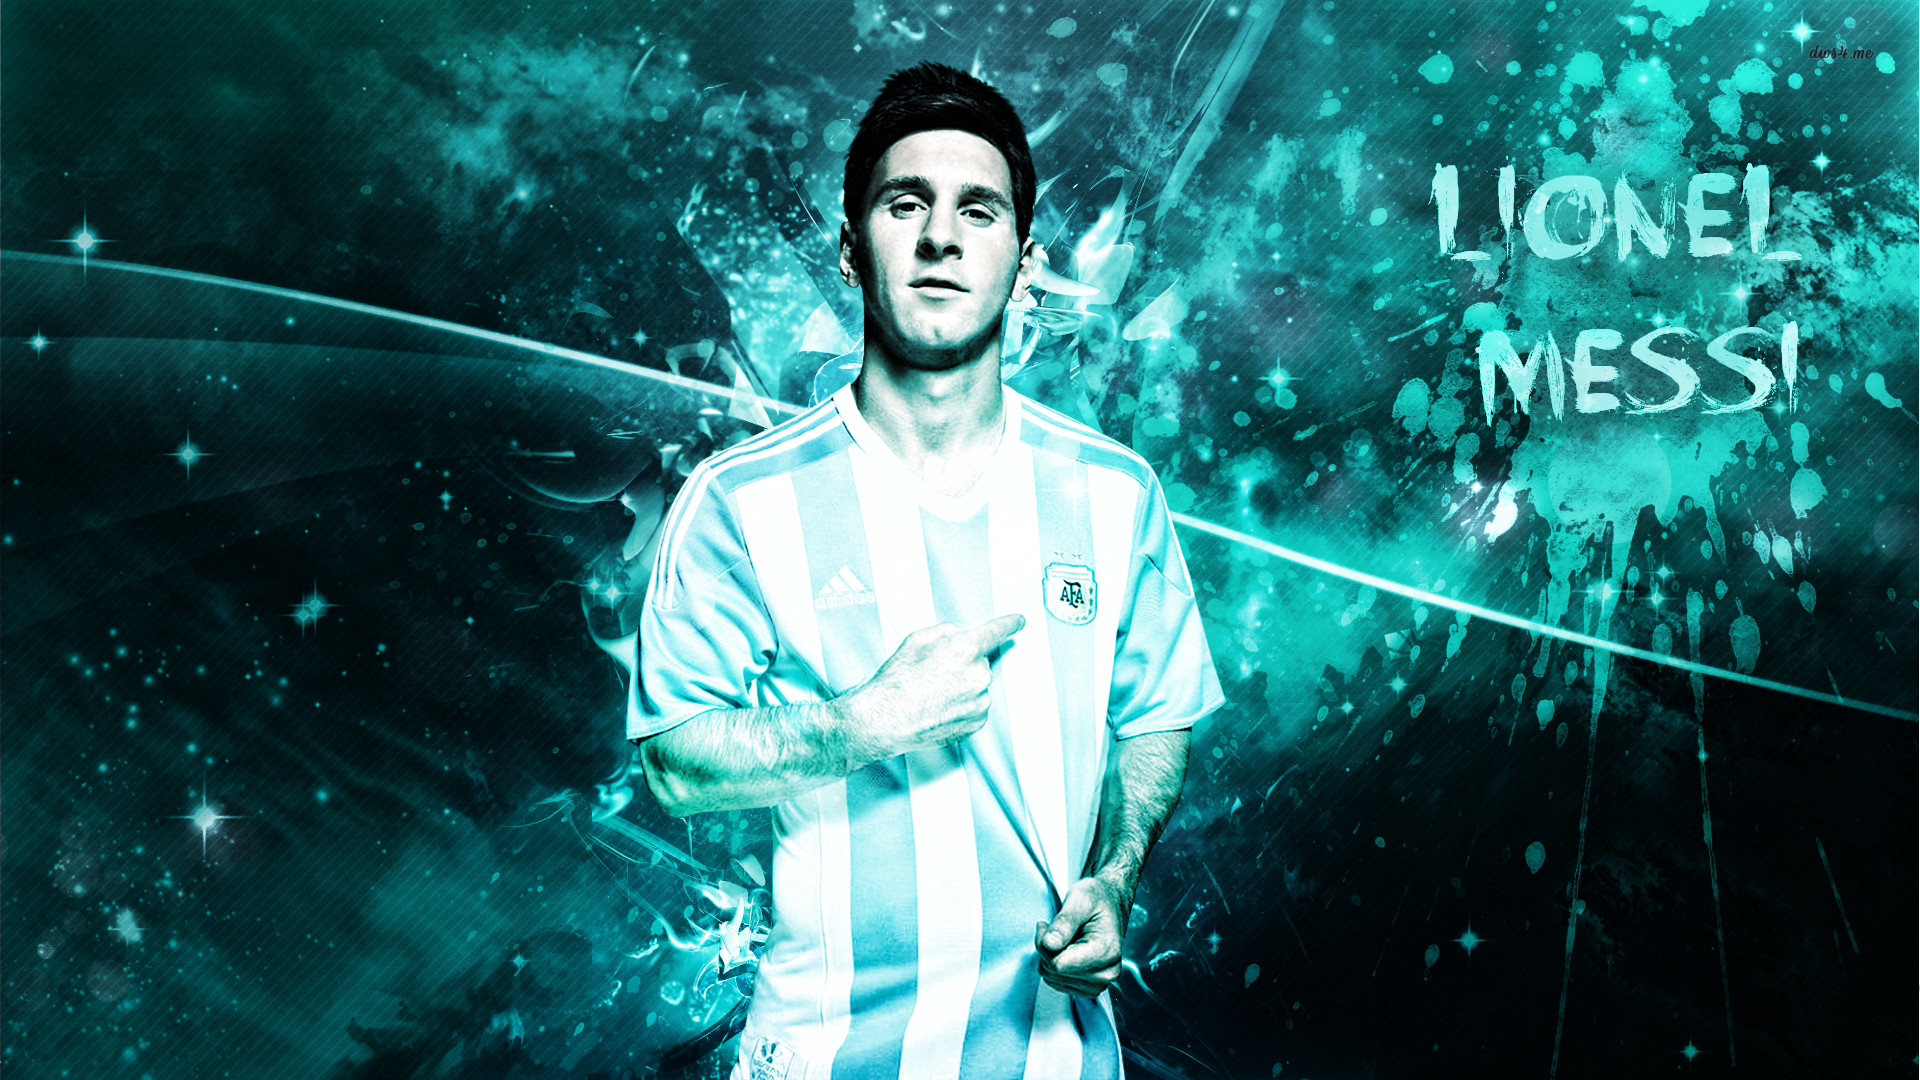 Lionel Messi Argentina Wallpapers Hd - Messi Wallpaper Images Of Argentina - HD Wallpaper 